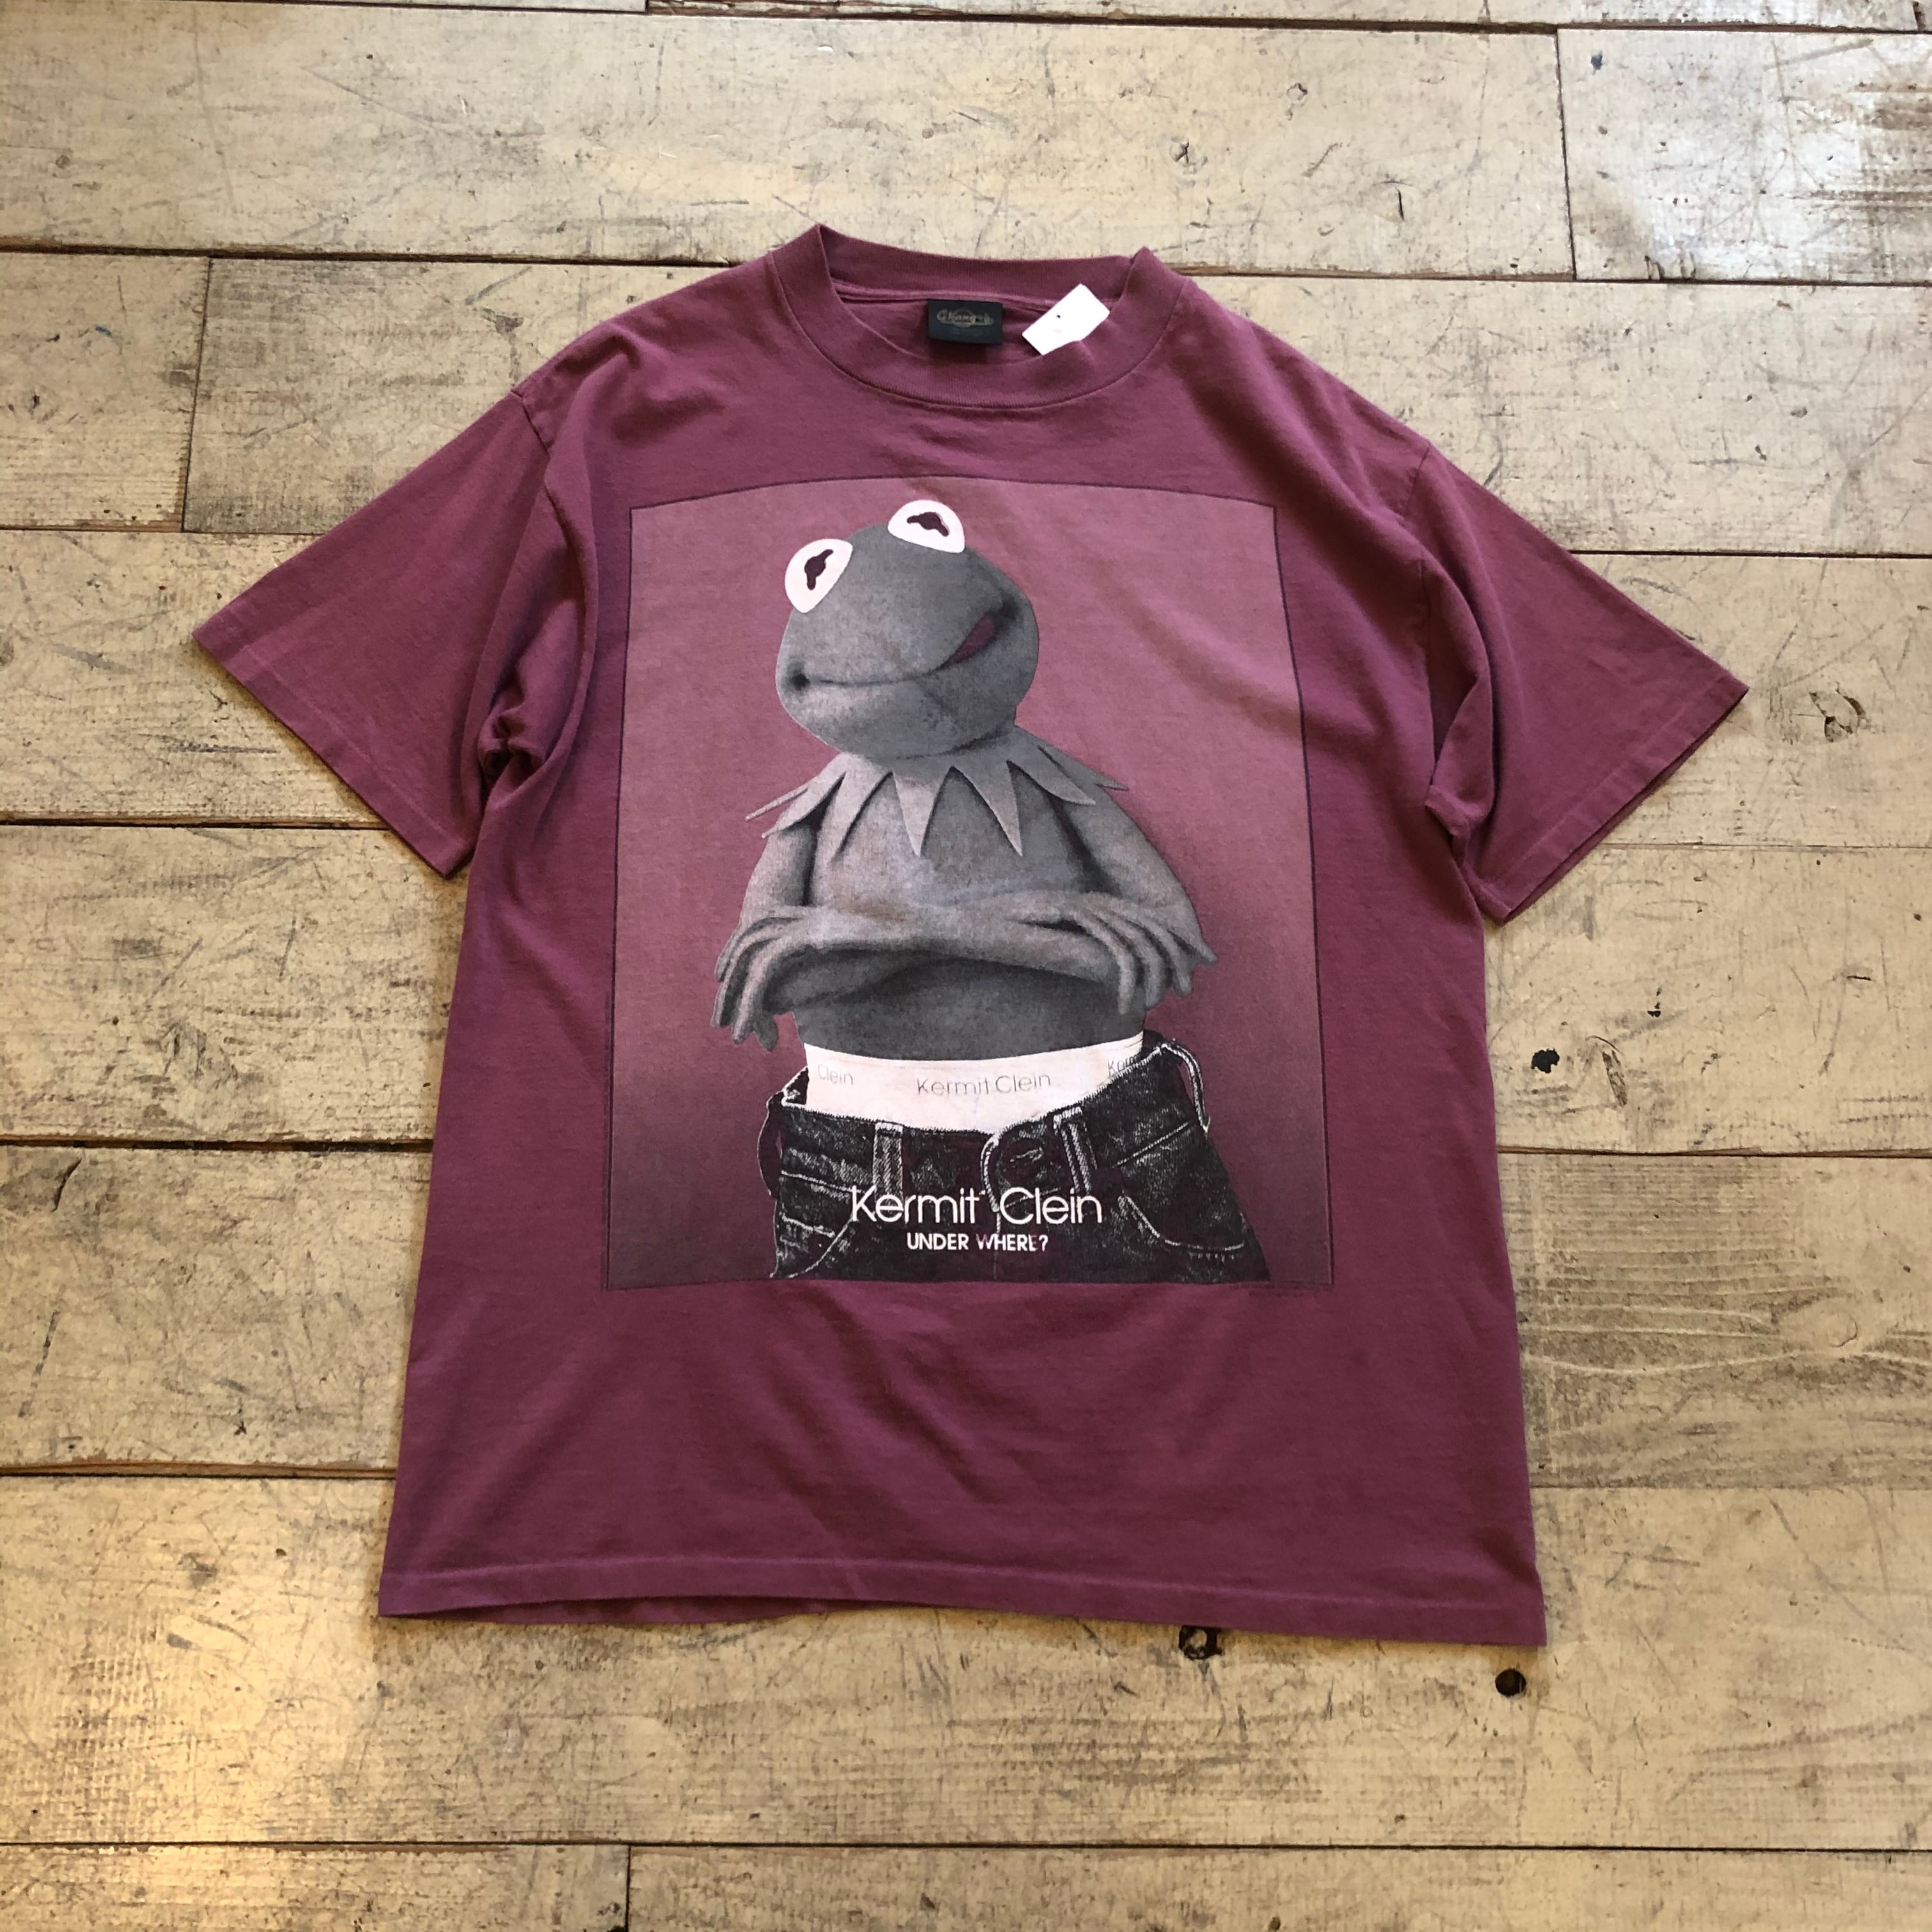 90s Kermit Clein T-shirt | What’z up powered by BASE